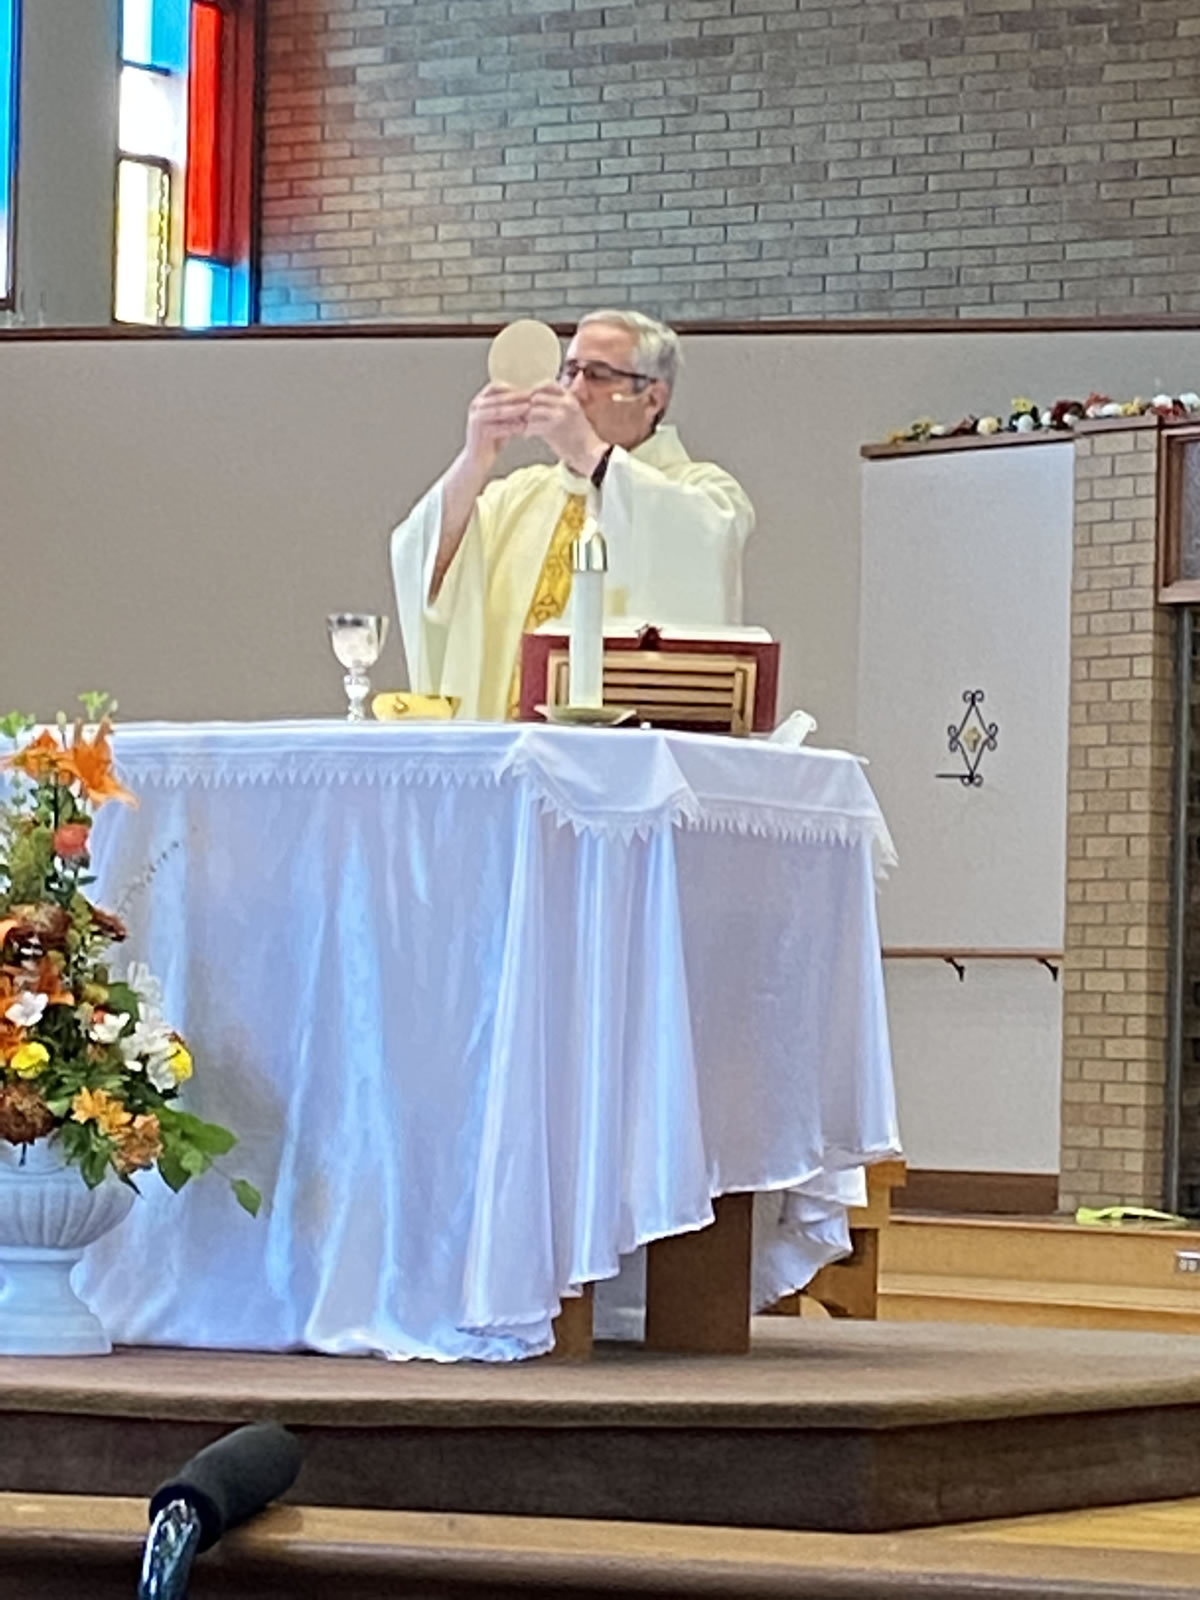 Mass of Thanksgiving and WWCCCR Office Blessing